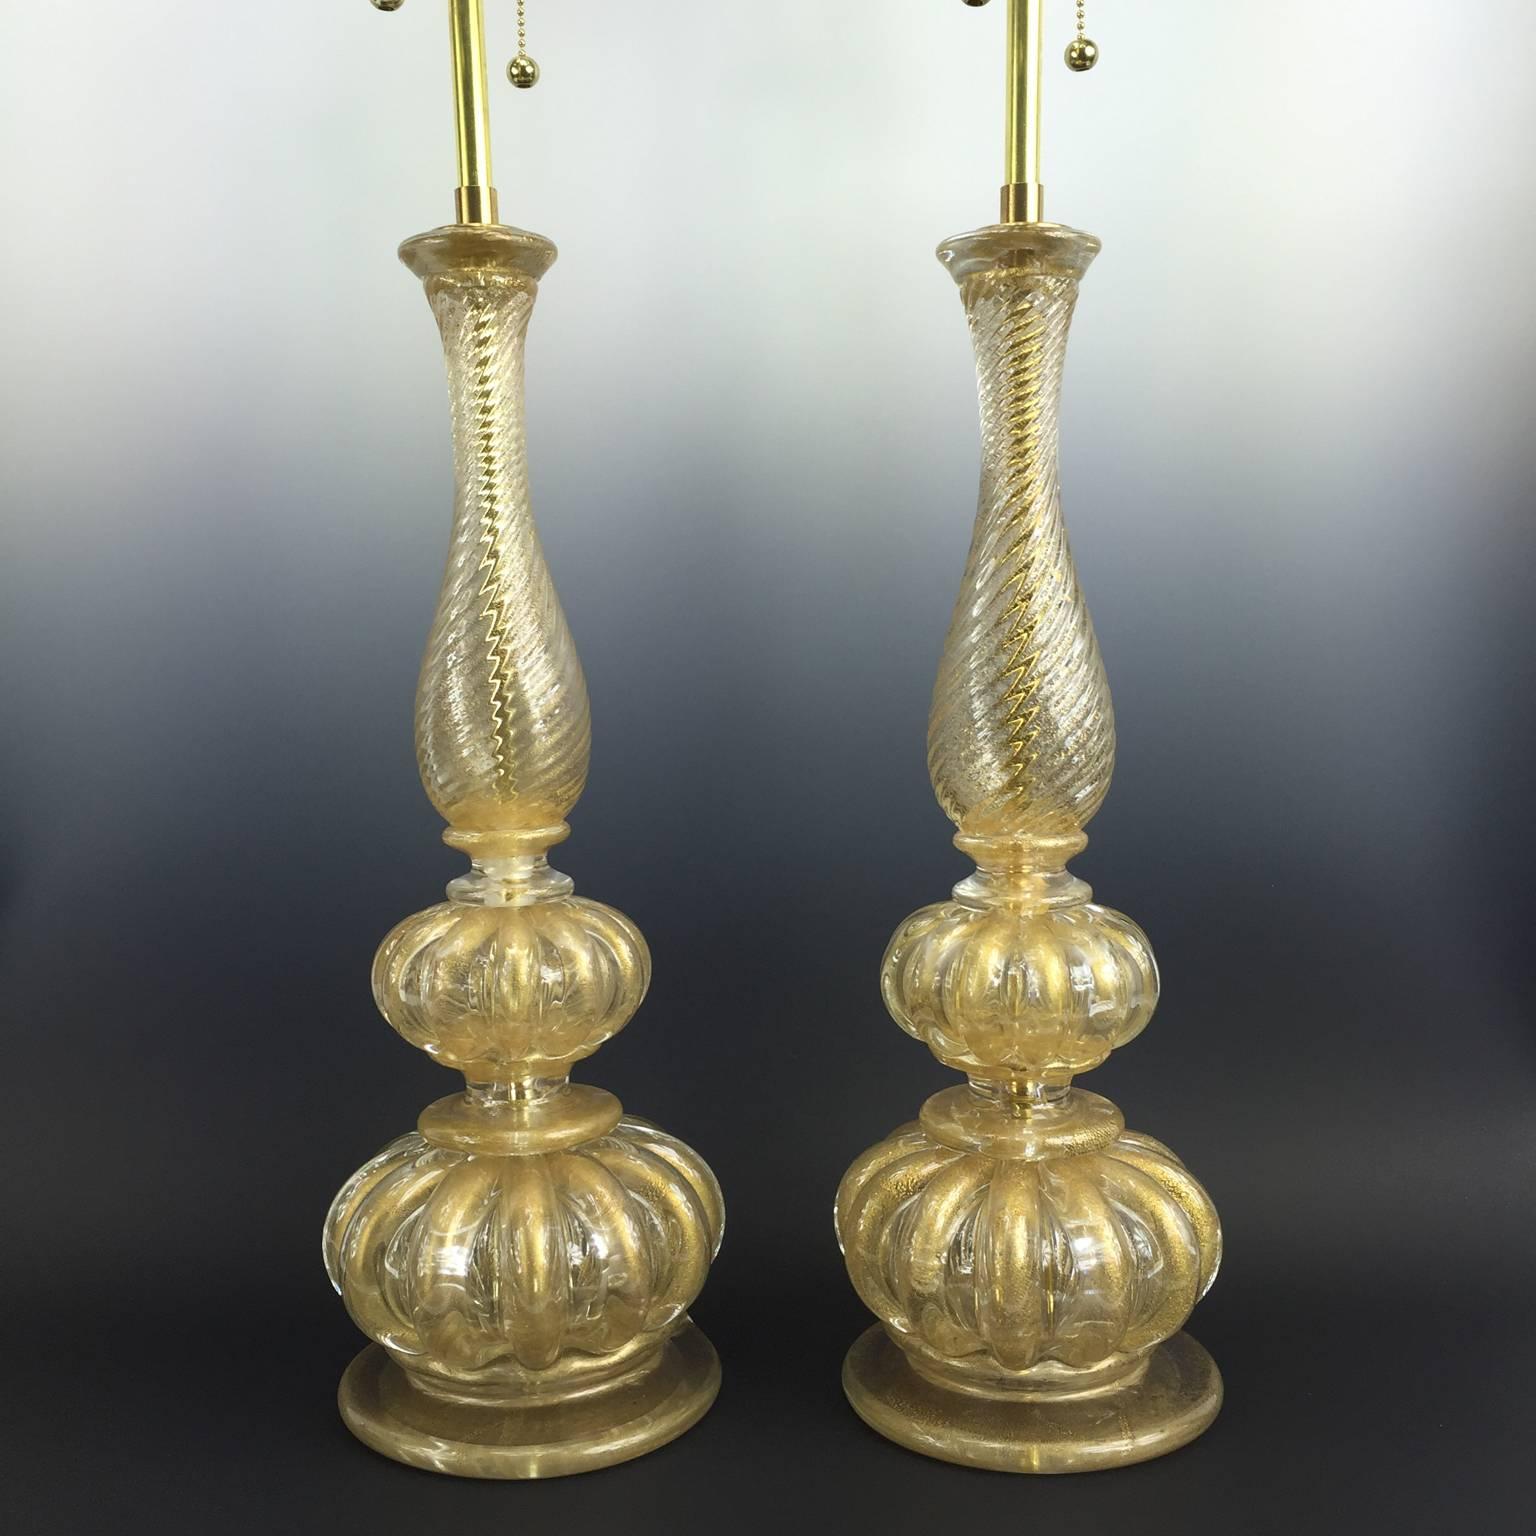 An exquisite pair of vintage, hand-blown Murano glass lamps, produced circa 1940’s by Barovier and Toso, each with double cluster sockets (pull chains included), over glass baluster form body with gadrooned bulbs, the fluted parts of the lamps